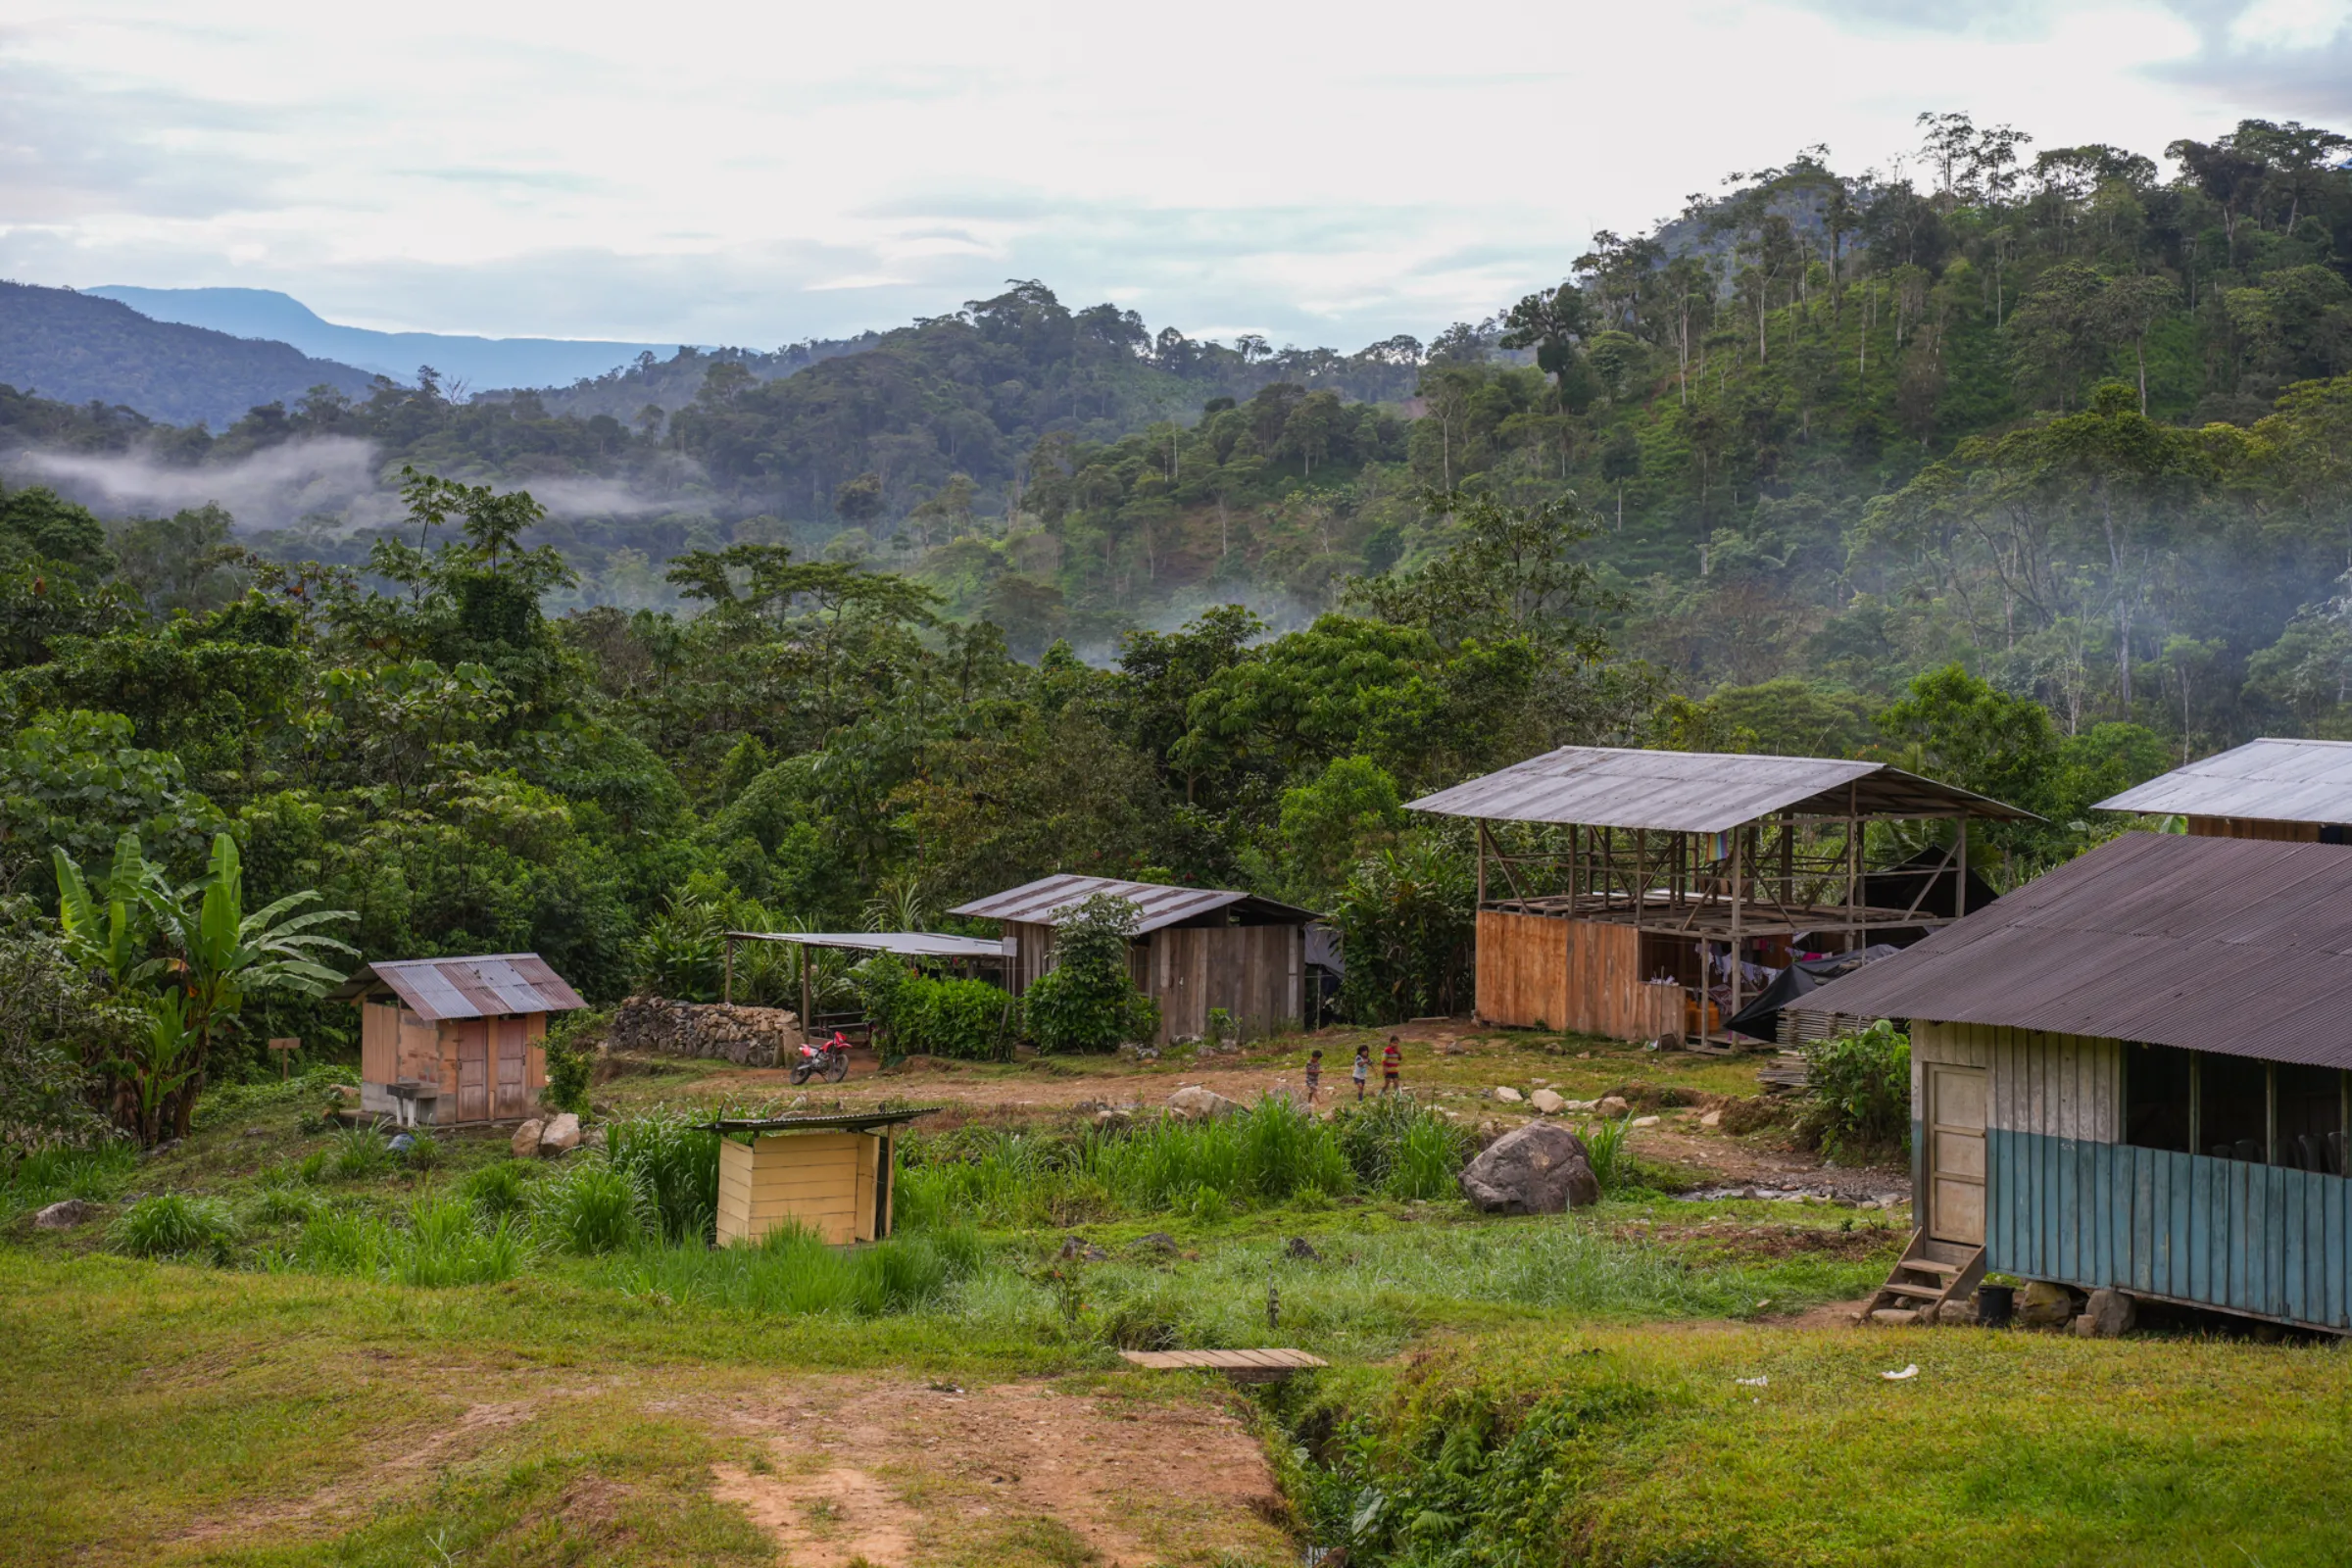 The houses of the Shuar community of Maikiuants living in the mountain and forest, where about 50 families are resisting the construction of an open-pit copper mine run by Canadian company Solaris Resources